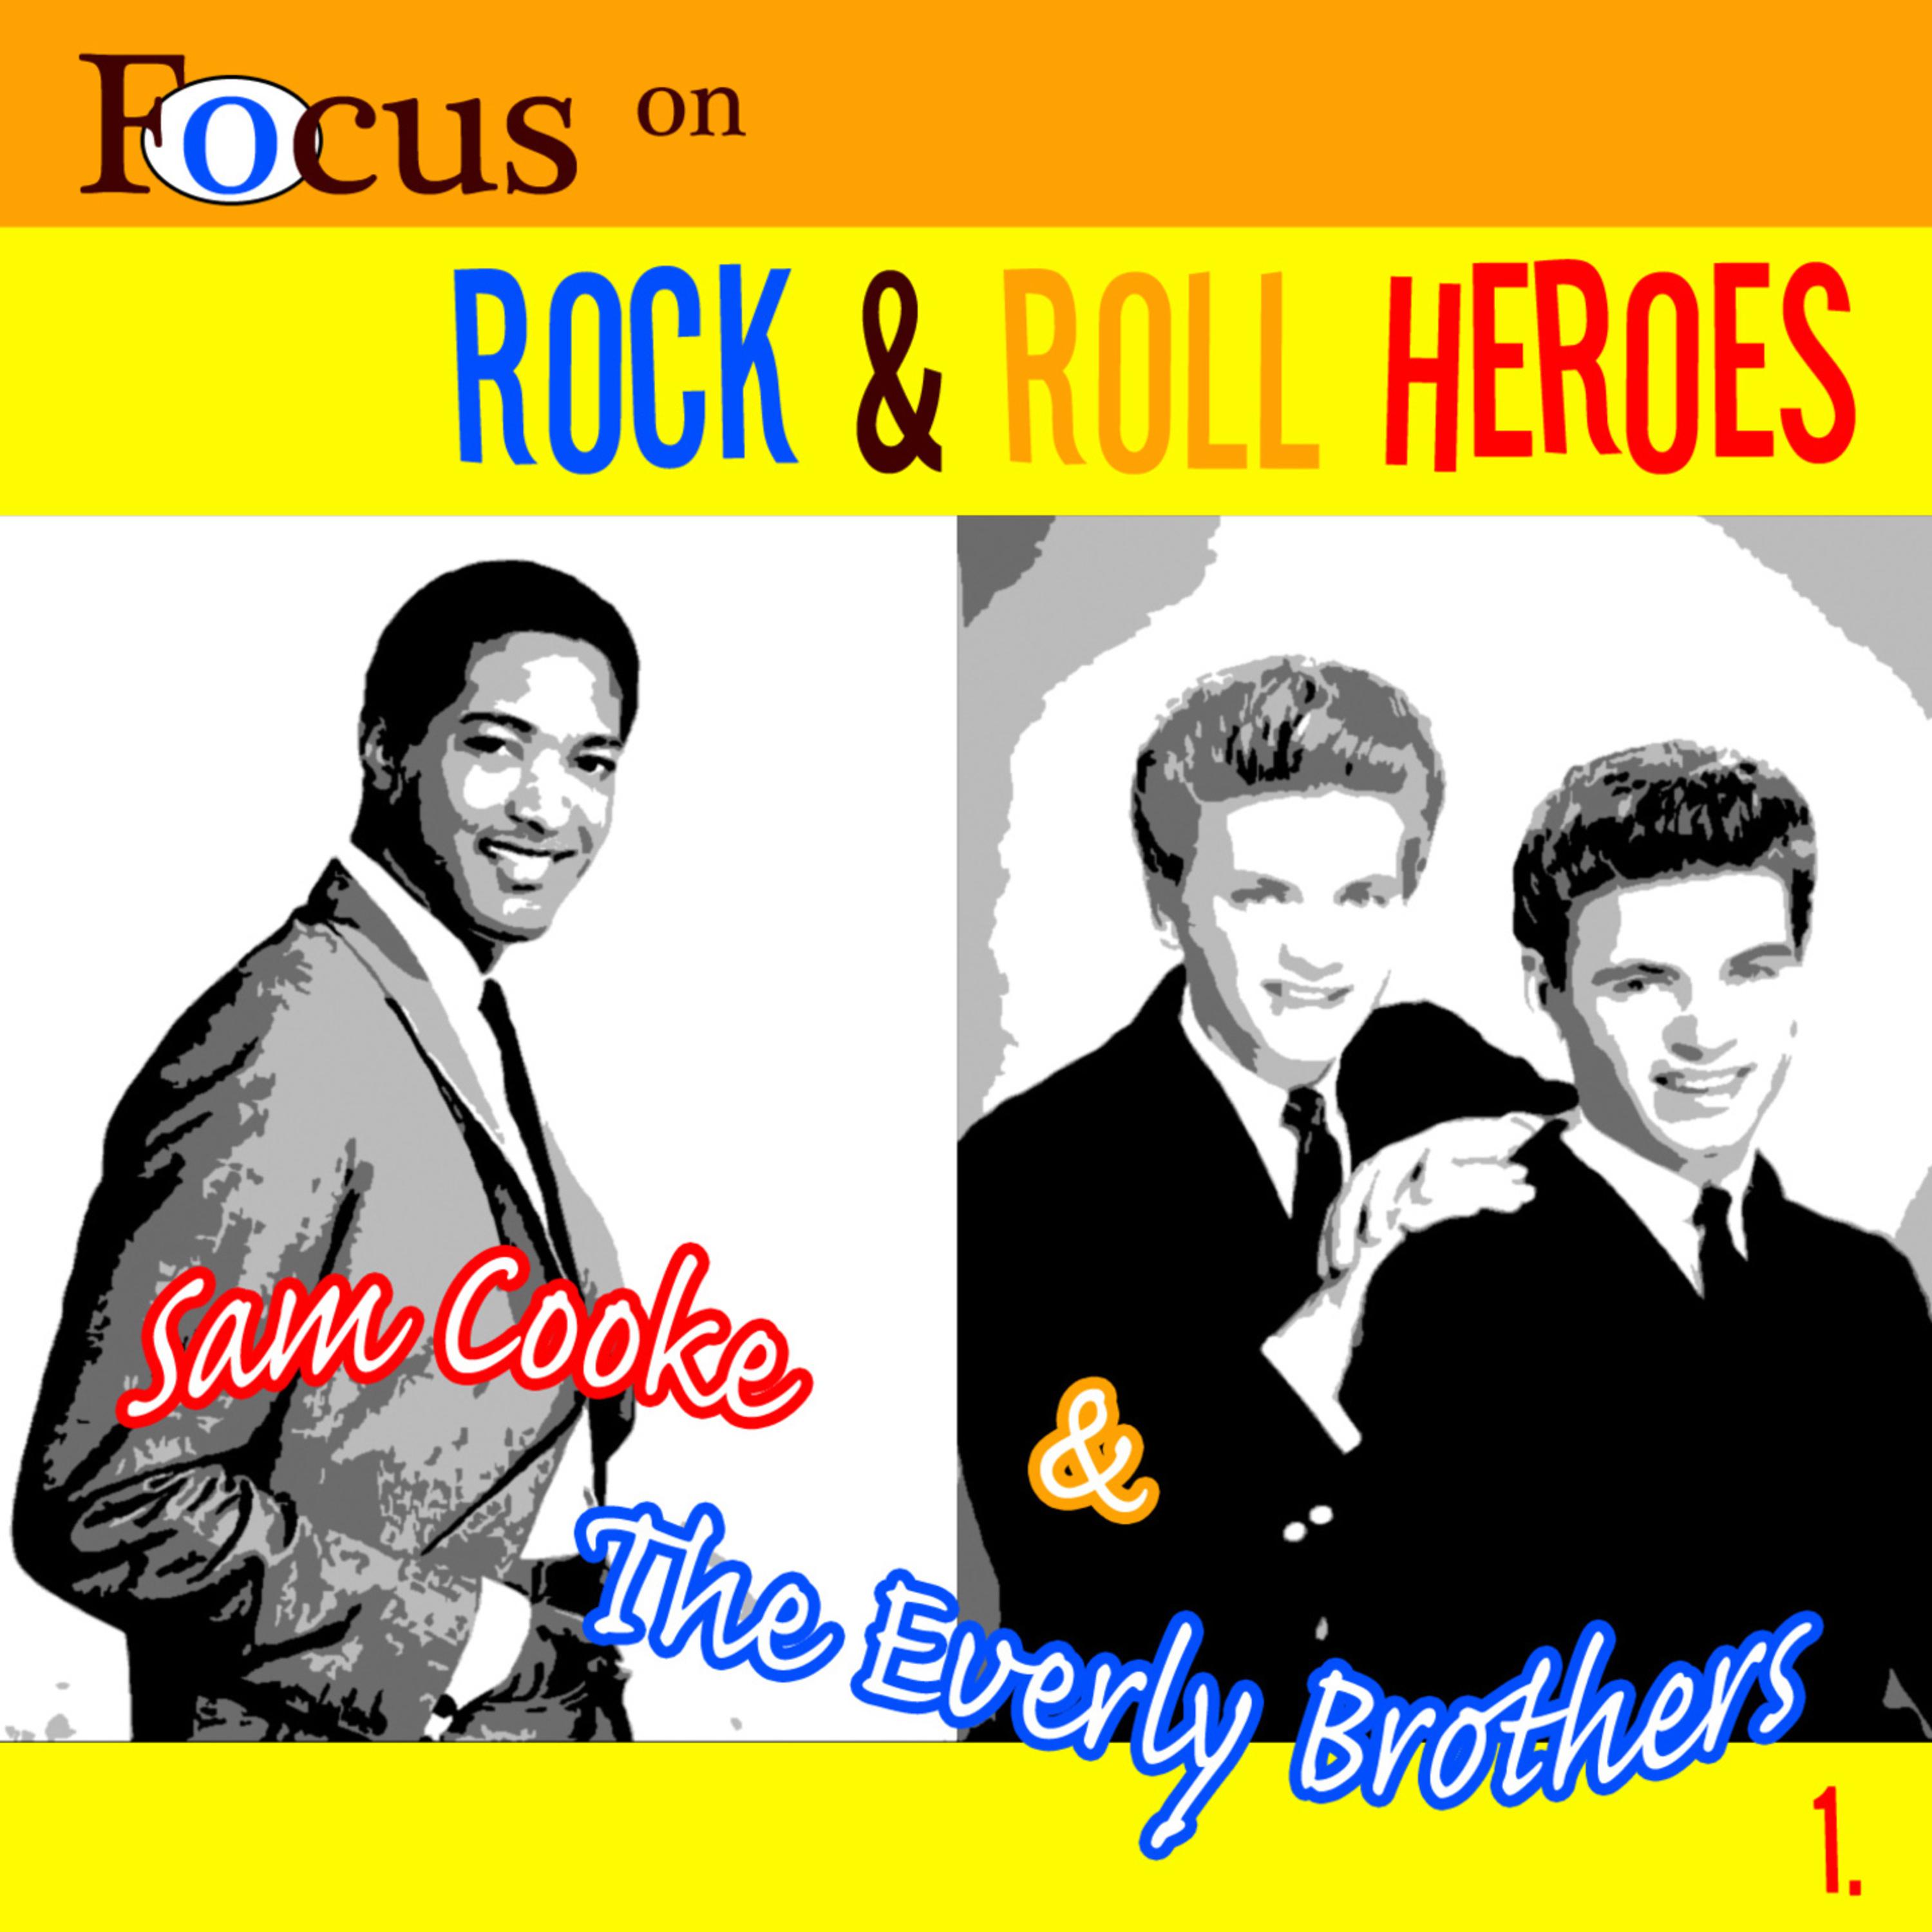 Focus On Rock & Pop Heroes - Sam Cooke & The Everley Brothers 1专辑